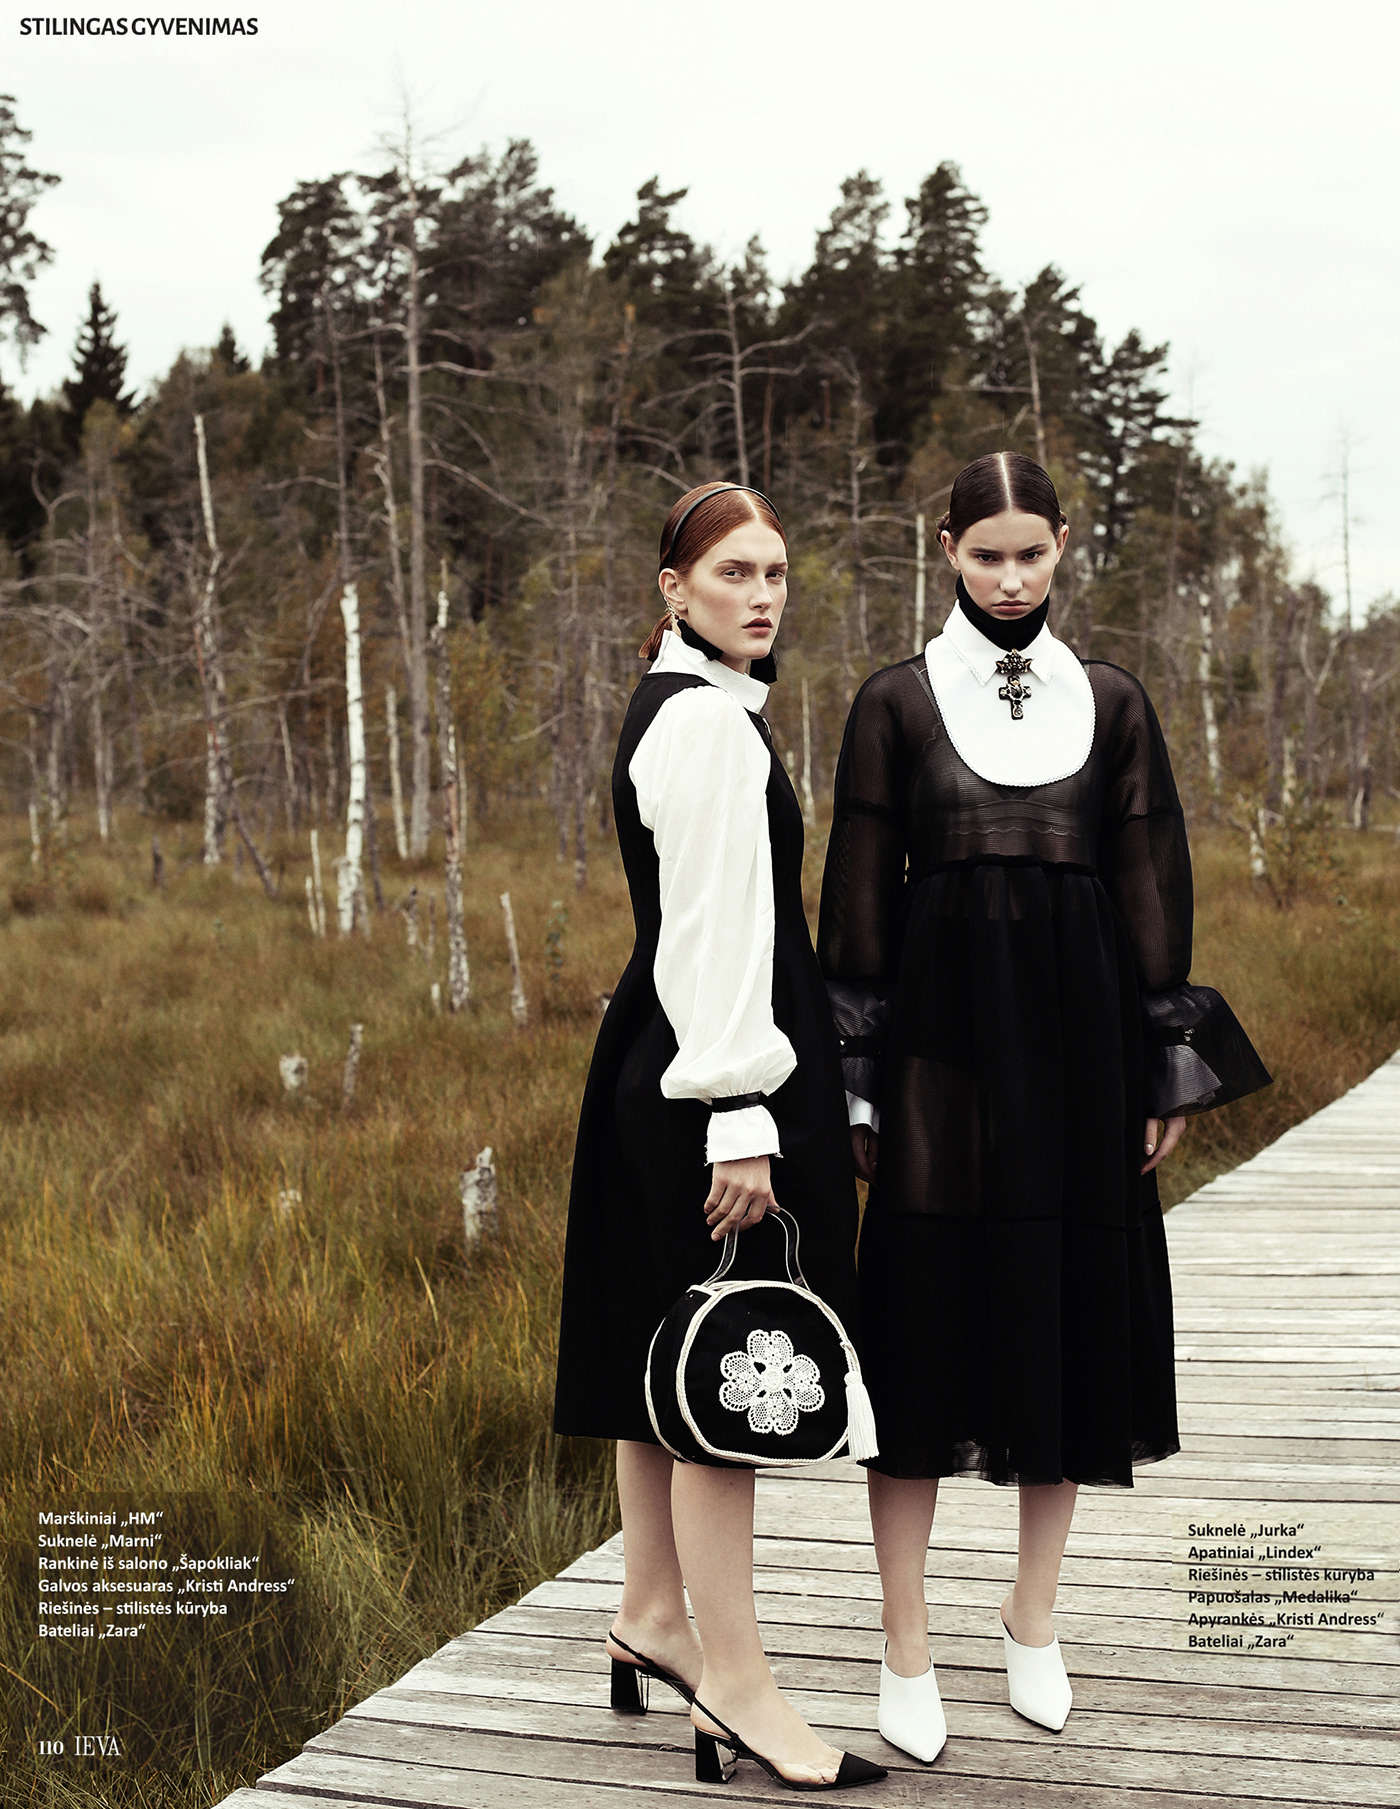 autumn forest swamp women models royalty Style concept editorial magazine